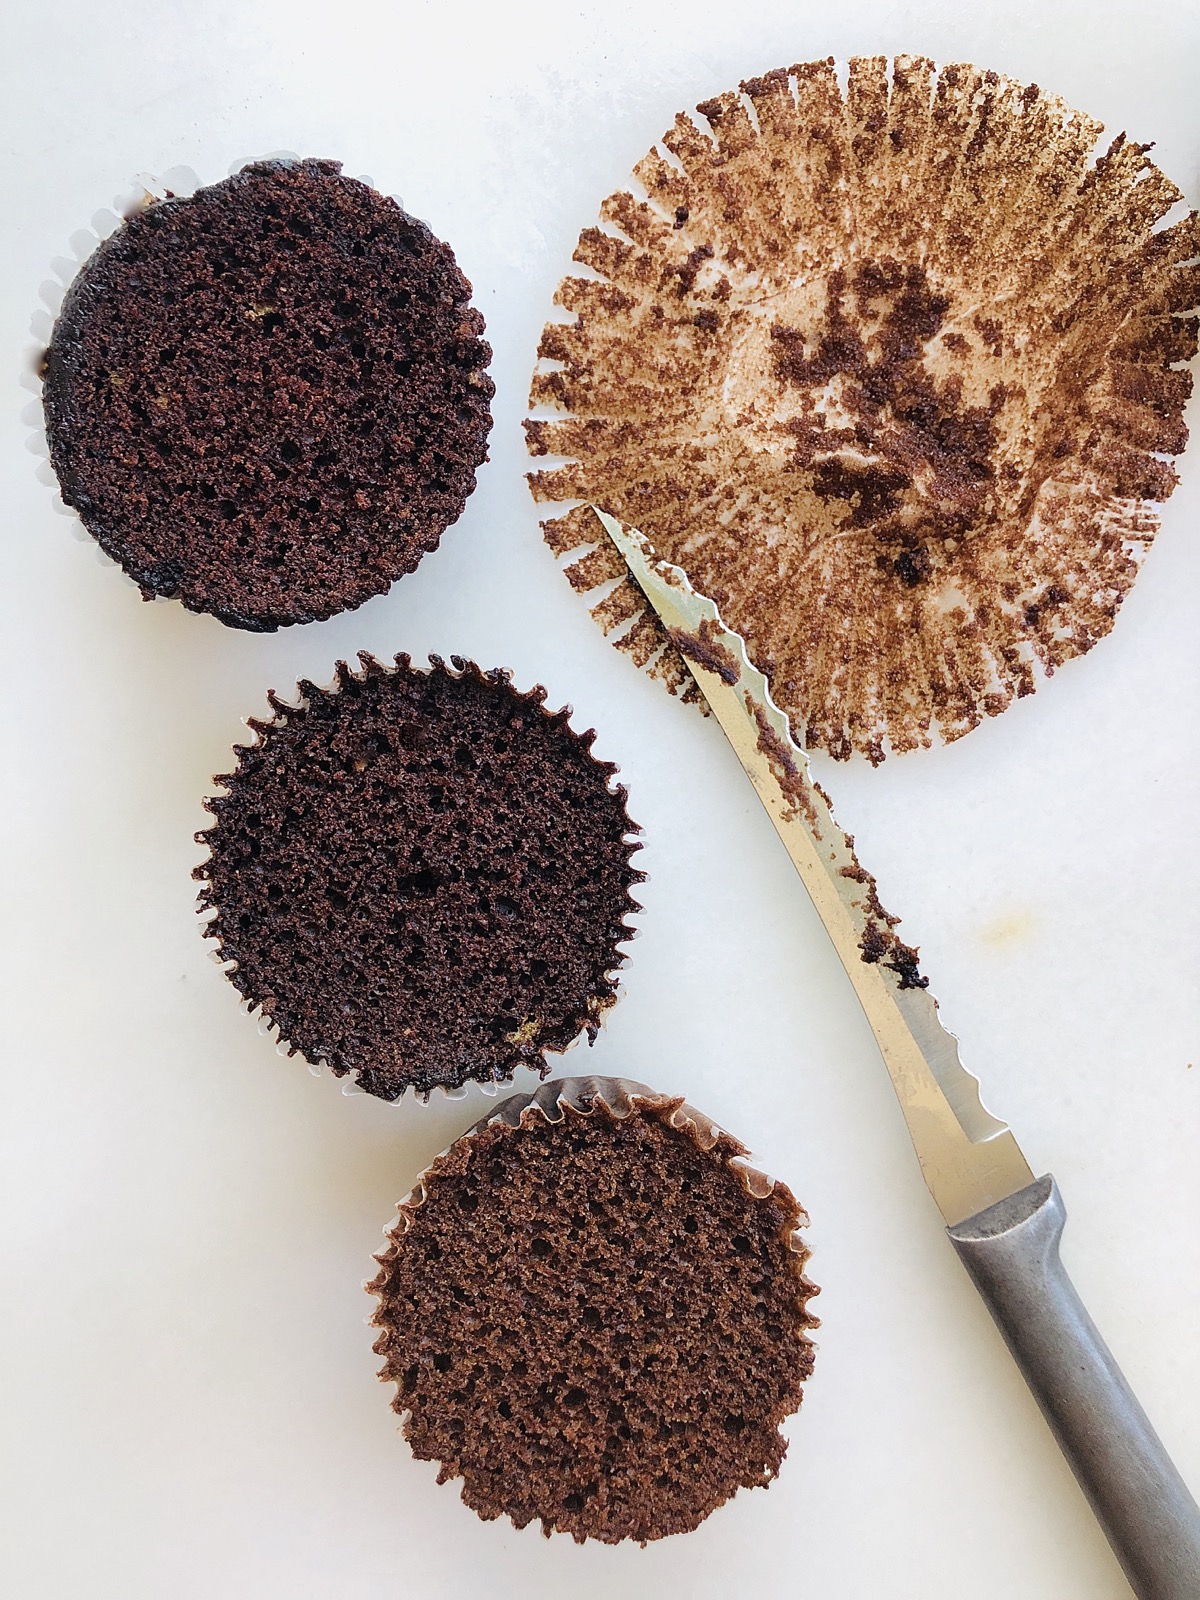 Cupcakes calling for Dutch-process cocoa baked instead with natural cocoa, and baked with natural cocoa with an adjustment to the leavening.